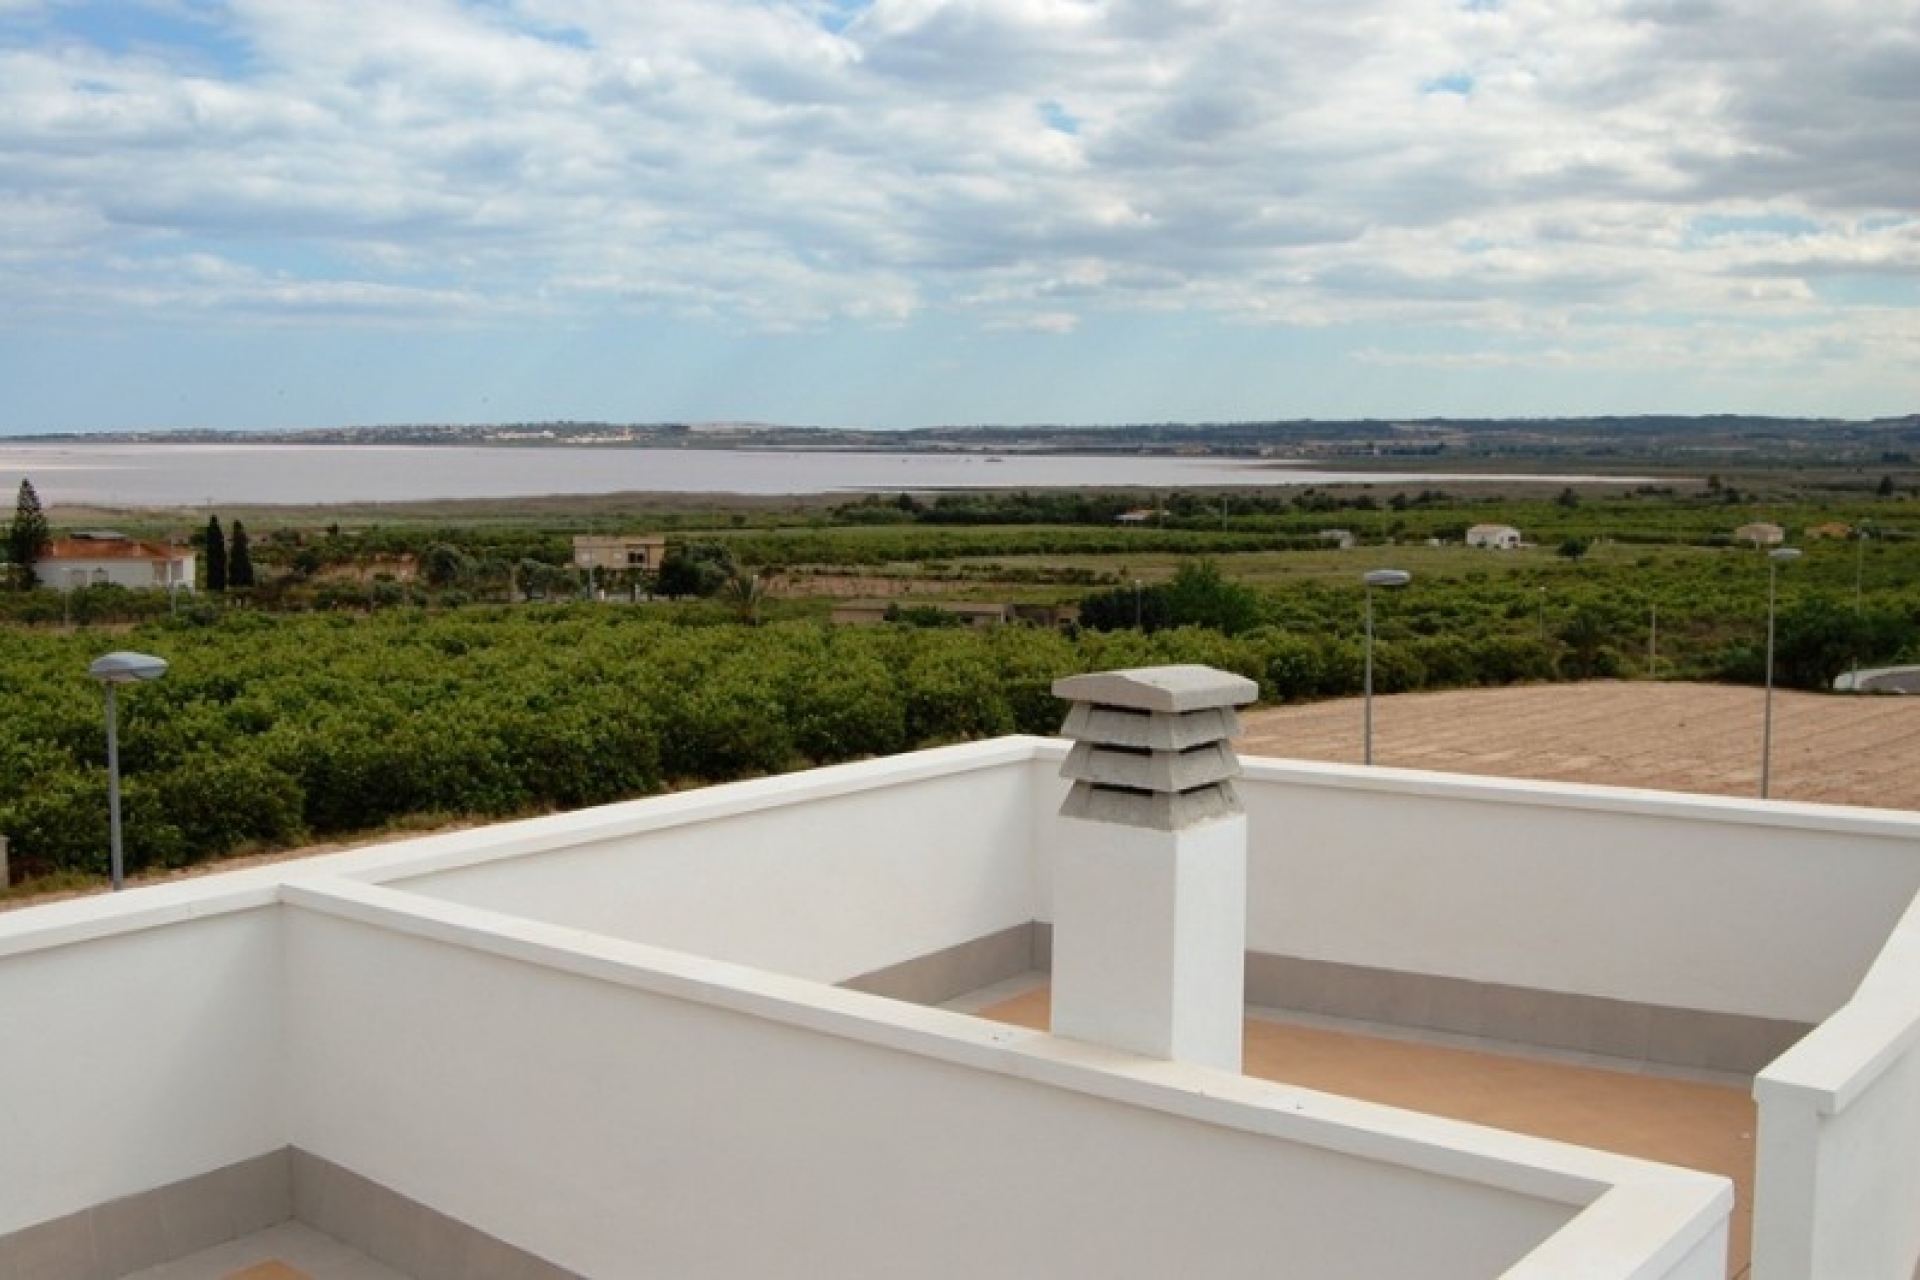 Los Montesinos property for sale, cheap property for sale in Los Montesinos near Torrevieja, Costa Blanca, Spain for sale cheap.